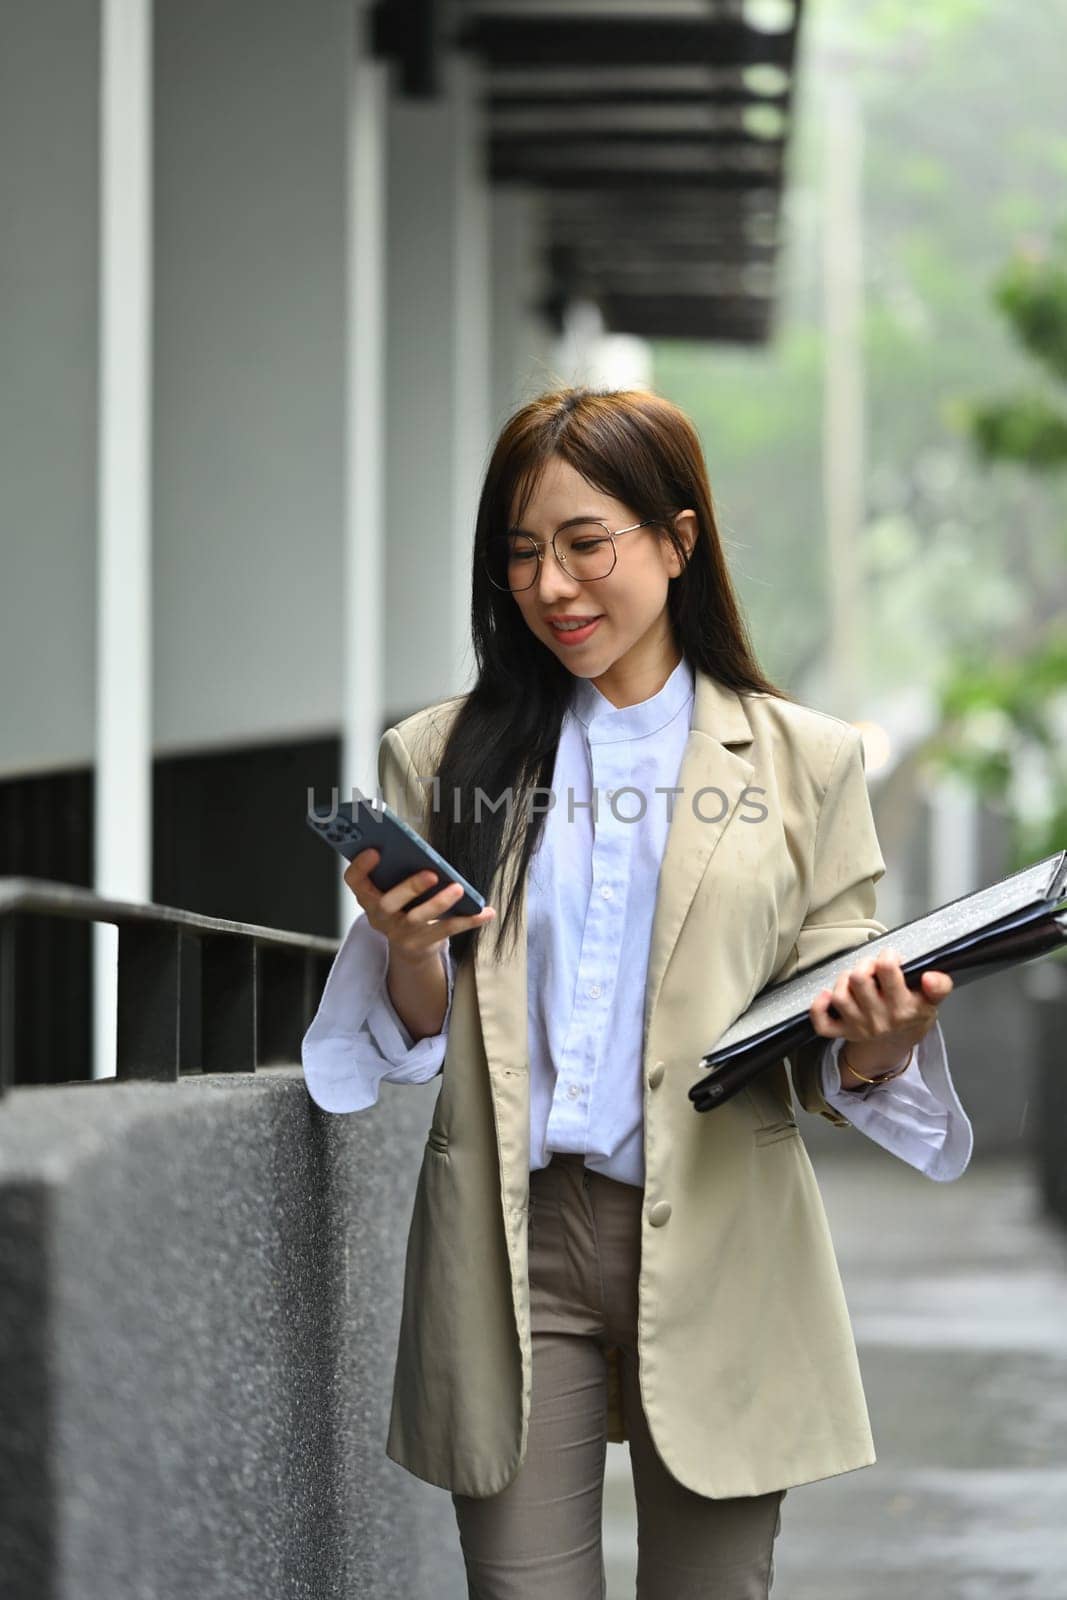 Beautiful female entrepreneur walking near office building chatting online with friends on mobile phone.